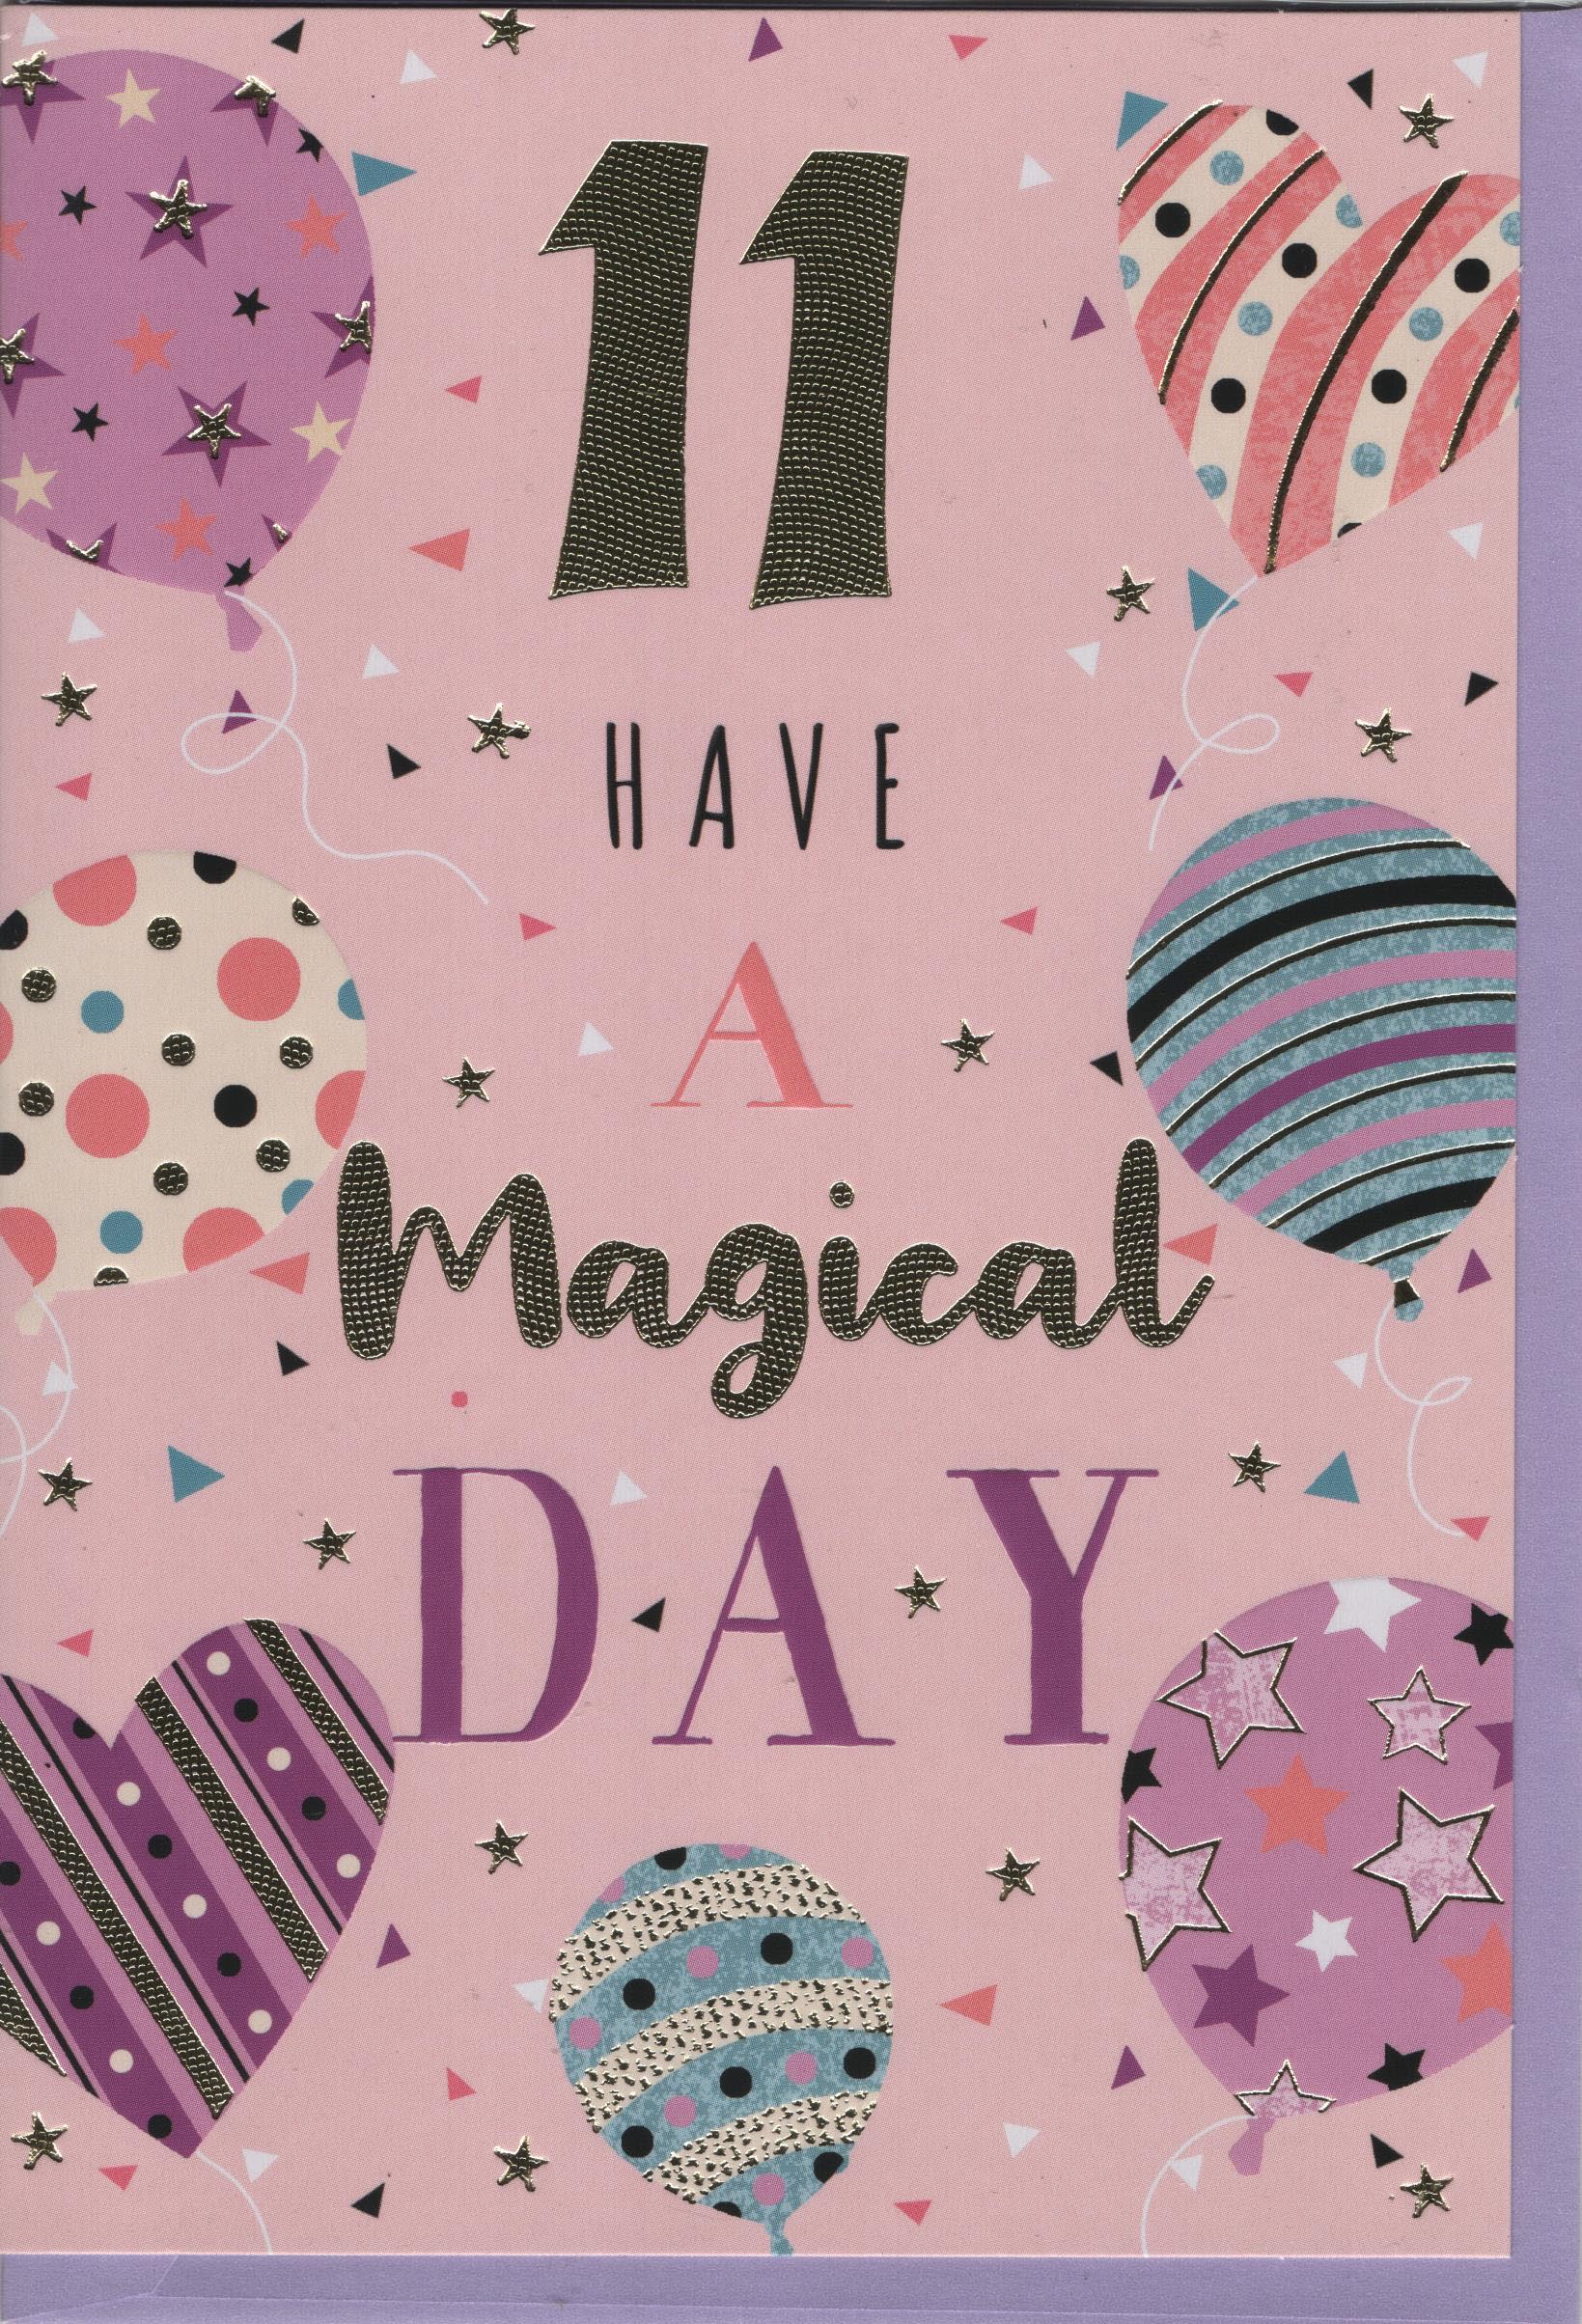 11 Have a Magical Day